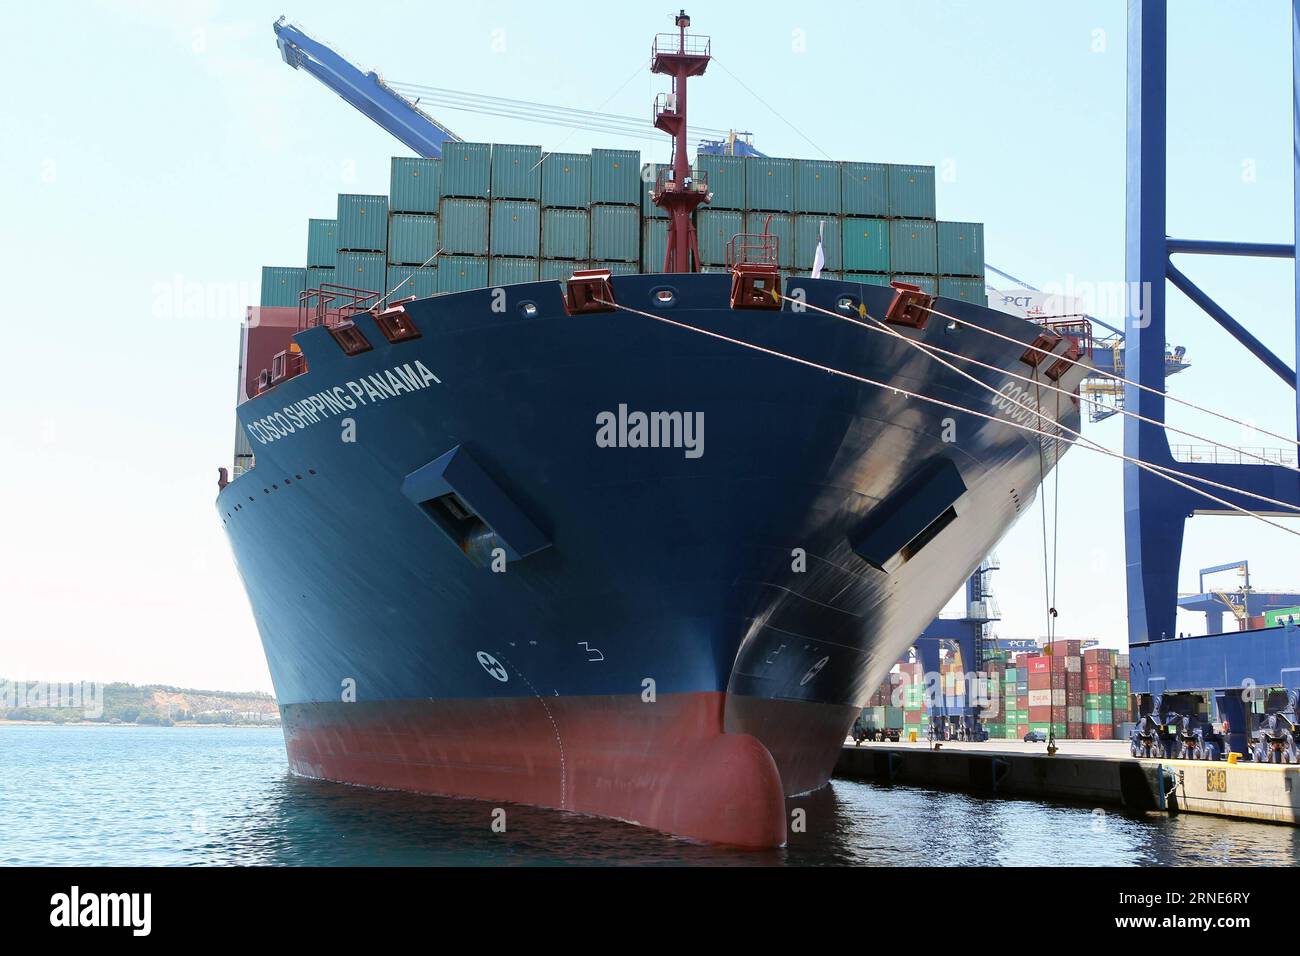 ATHENS, June 11, 2016 -- COSCO SHIPPING PANAMA docks at Piraeus port, Greece, June 11, 2016. COSCO SHIPPING PANAMA, the vessel that was selected to make the first historic transit through the expanded Panama Canal later this June, berthed at Piraeus port and left Greece on Saturday with the best wishes of Panama Canal Authority officials and China COSCO Shipping Corporation Limited top managers for the landmark sail. ) (lyi) GREECE-PIRAEUS PORT-COSCO-VESSEL-PANAMA CANAL MariosxLolos PUBLICATIONxNOTxINxCHN   Athens June 11 2016 Cosco Shipping Panama Docks AT Piraeus Port Greece June 11 2016 Cos Stock Photo